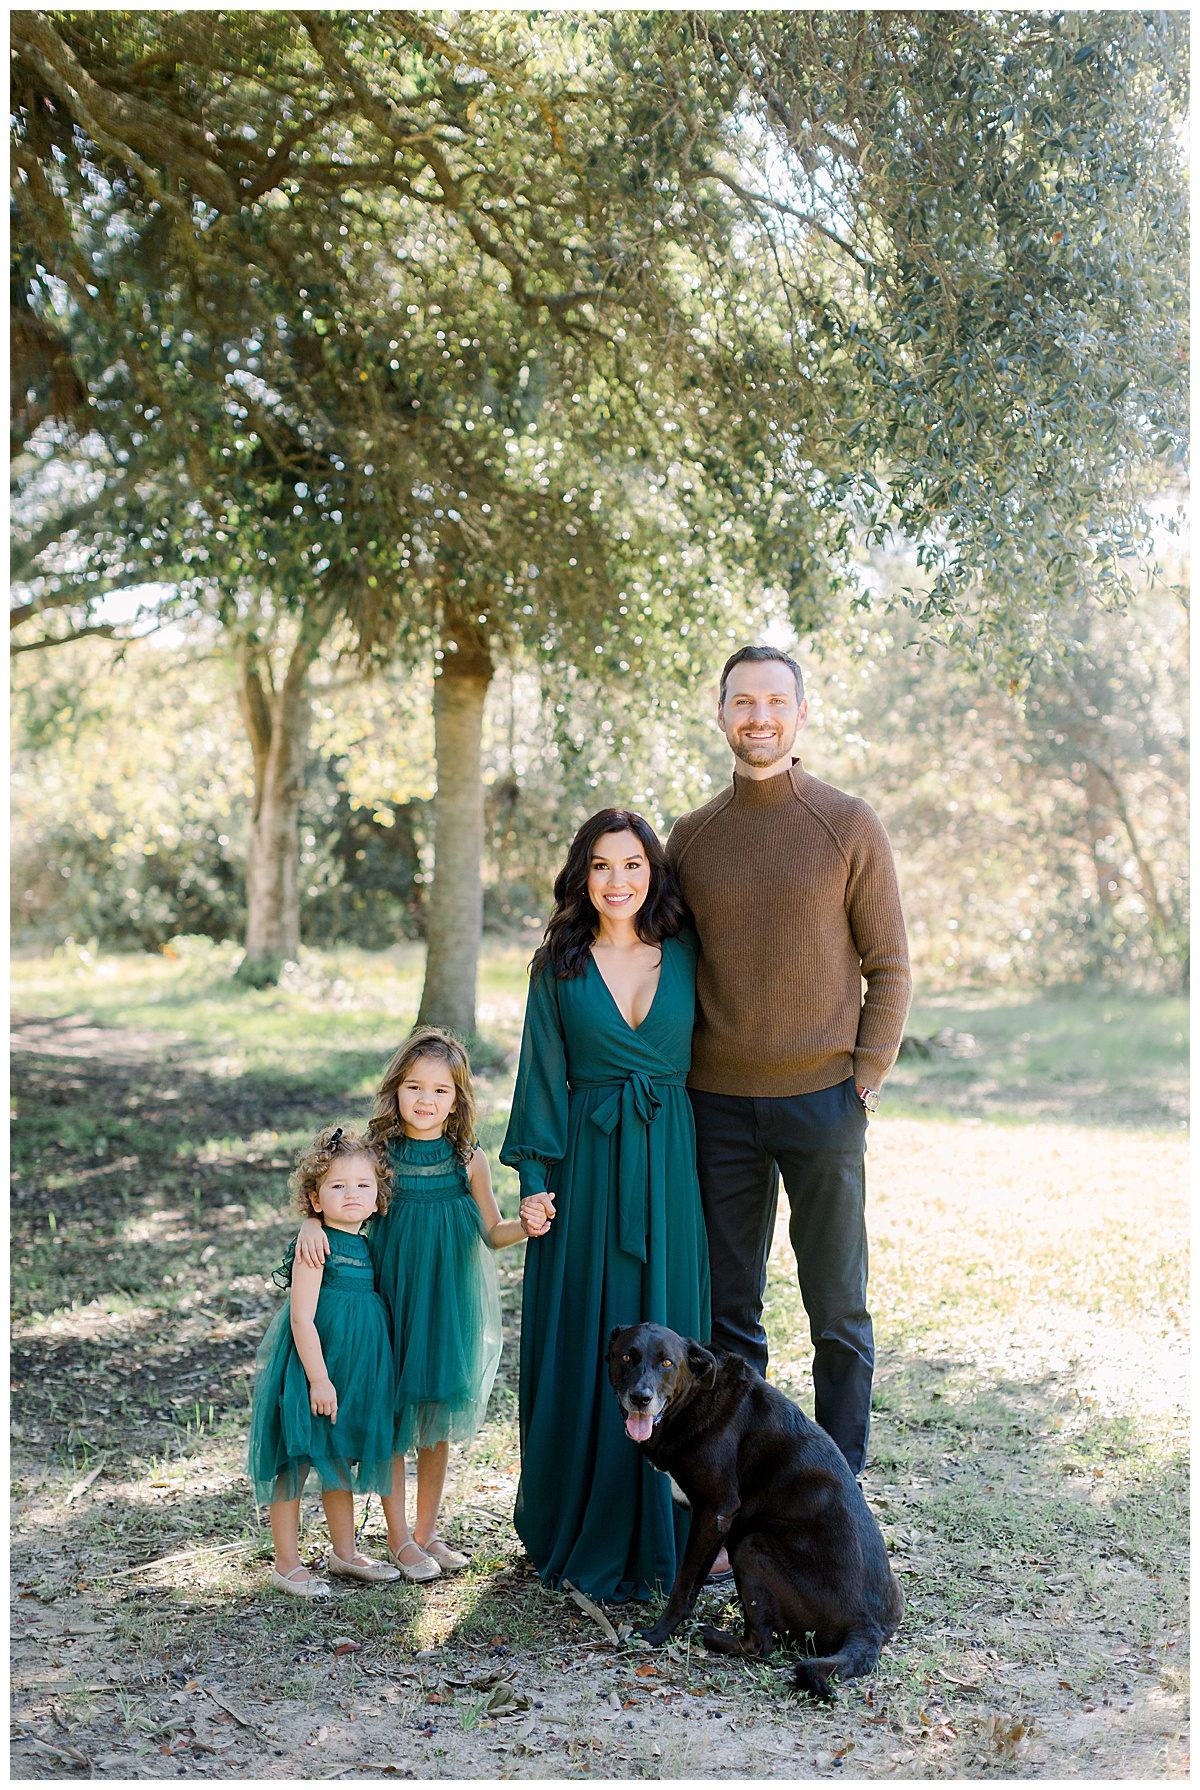 The O'Connor Family - Portraits in Charleston Fields | Candice Adelle Photography - Charleston Family Photographer_0095.jpg